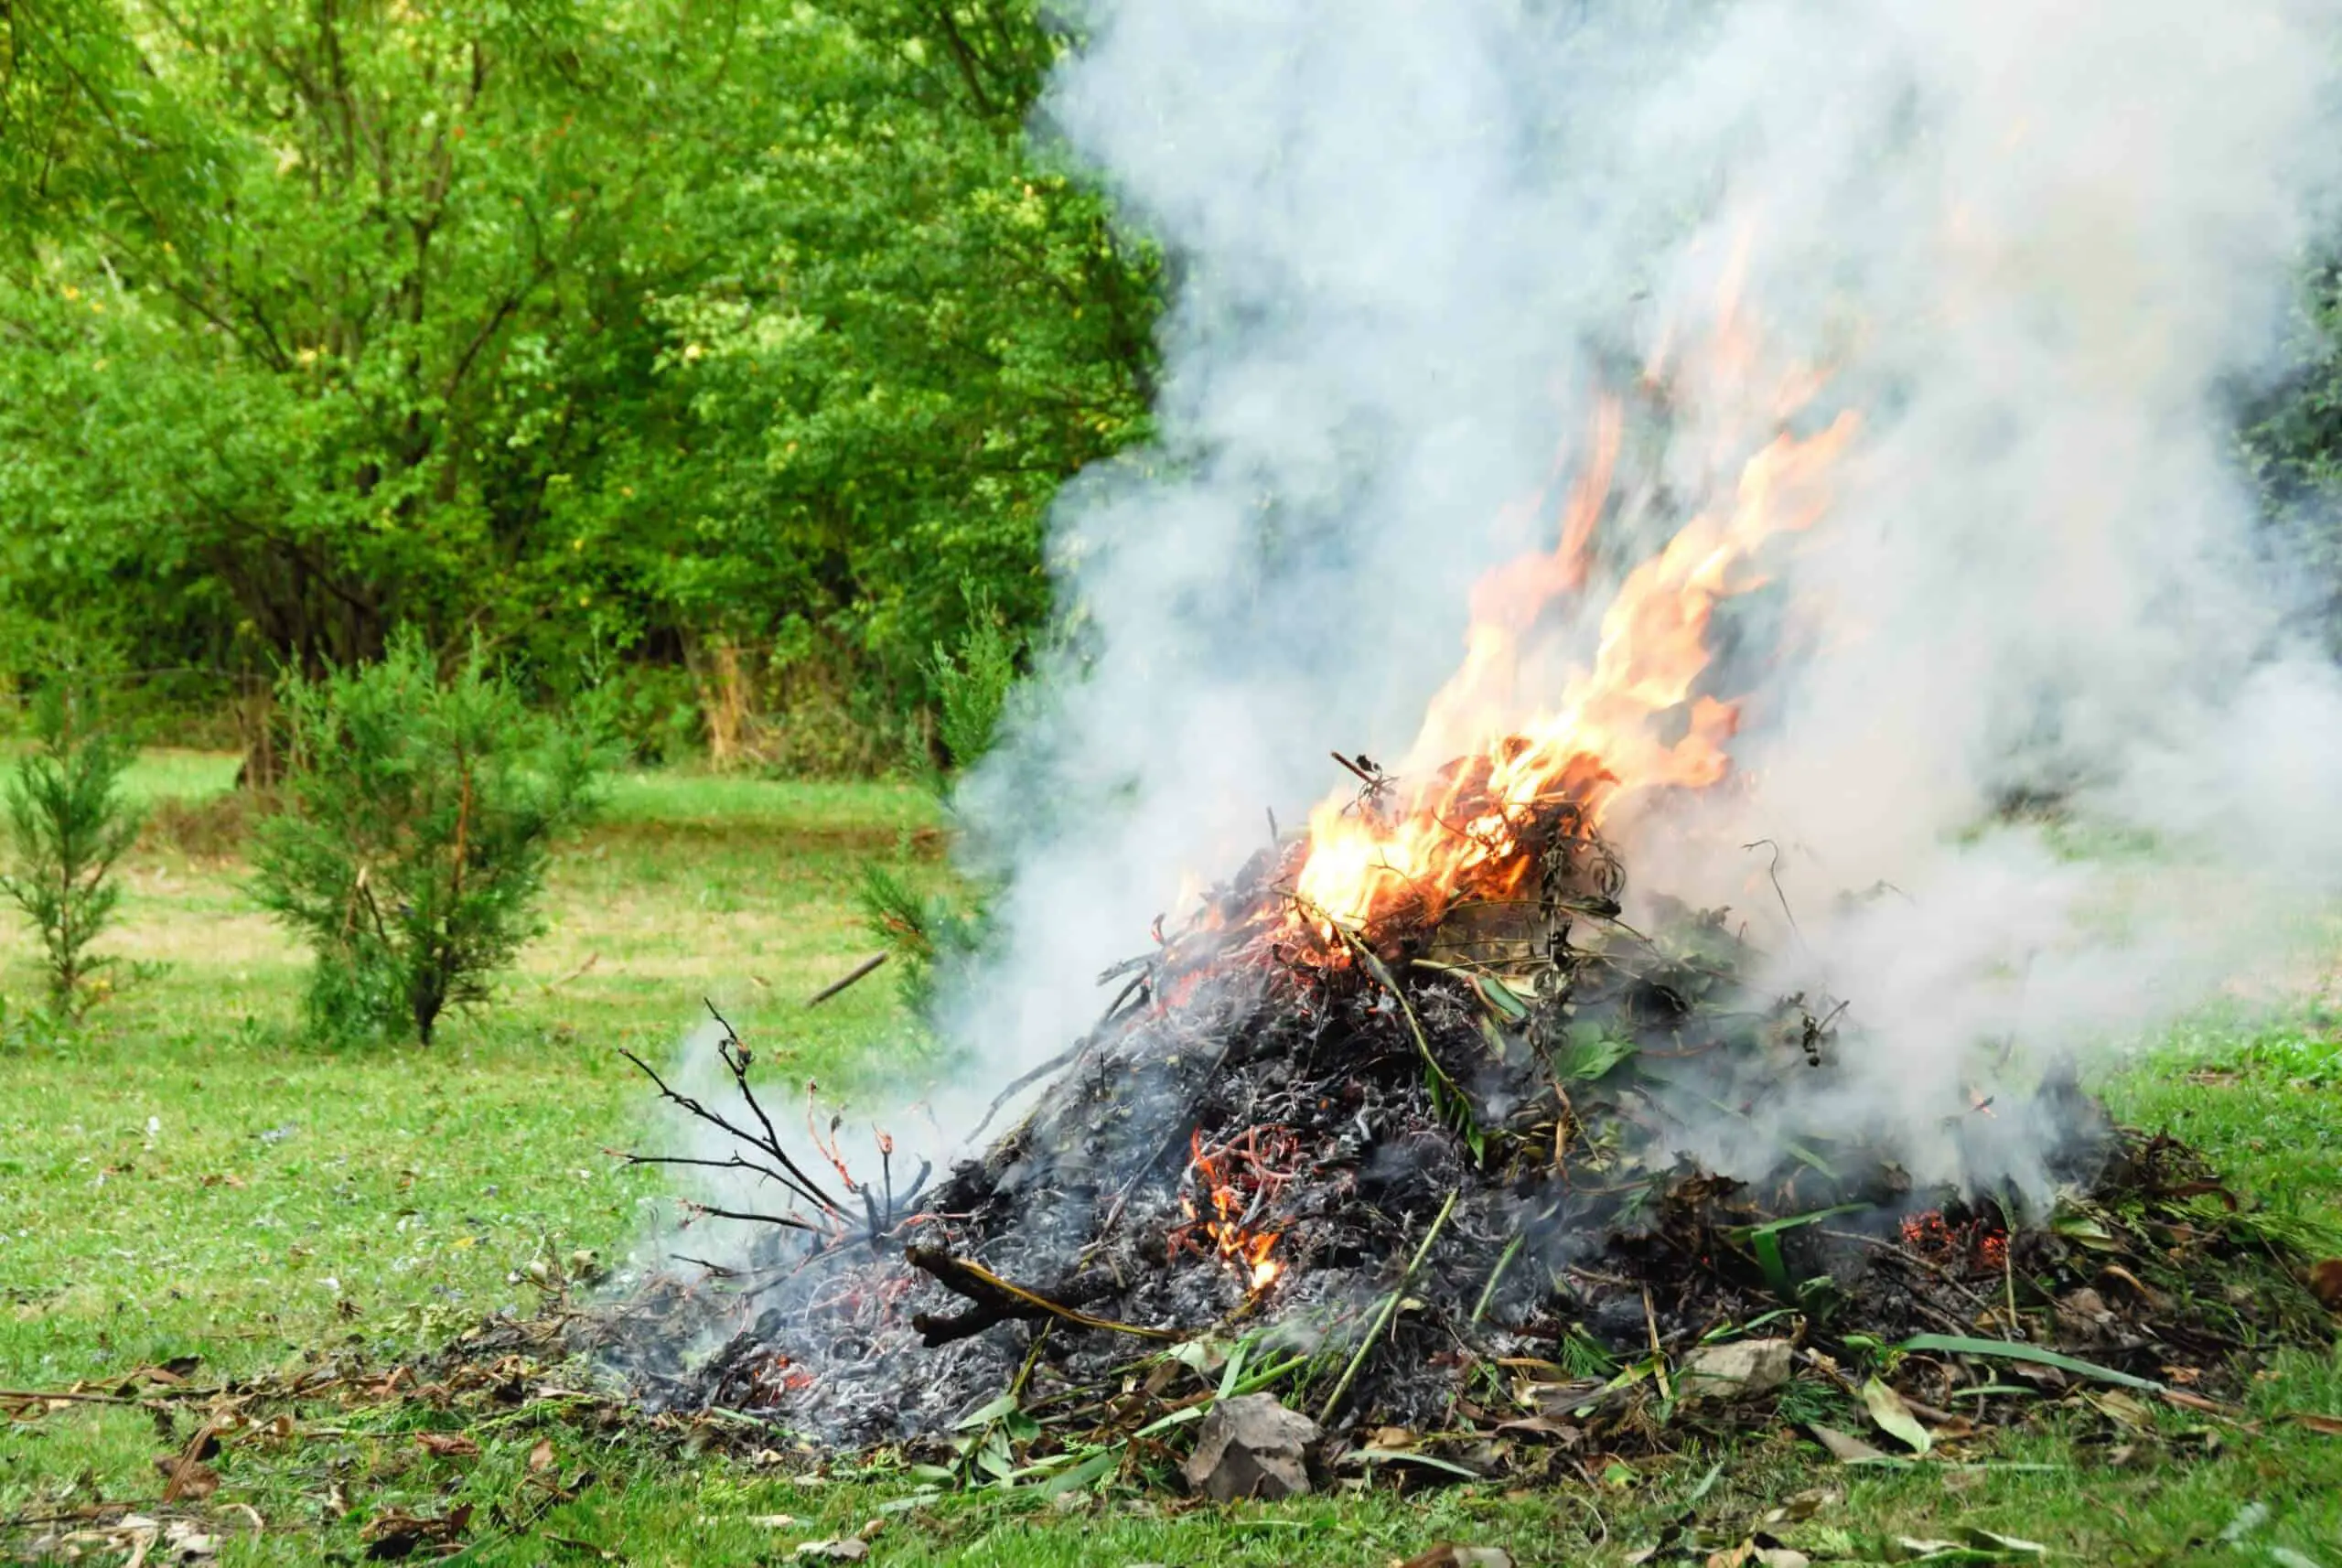 Removing Japanese knotweed by burning to ash before removal off your property